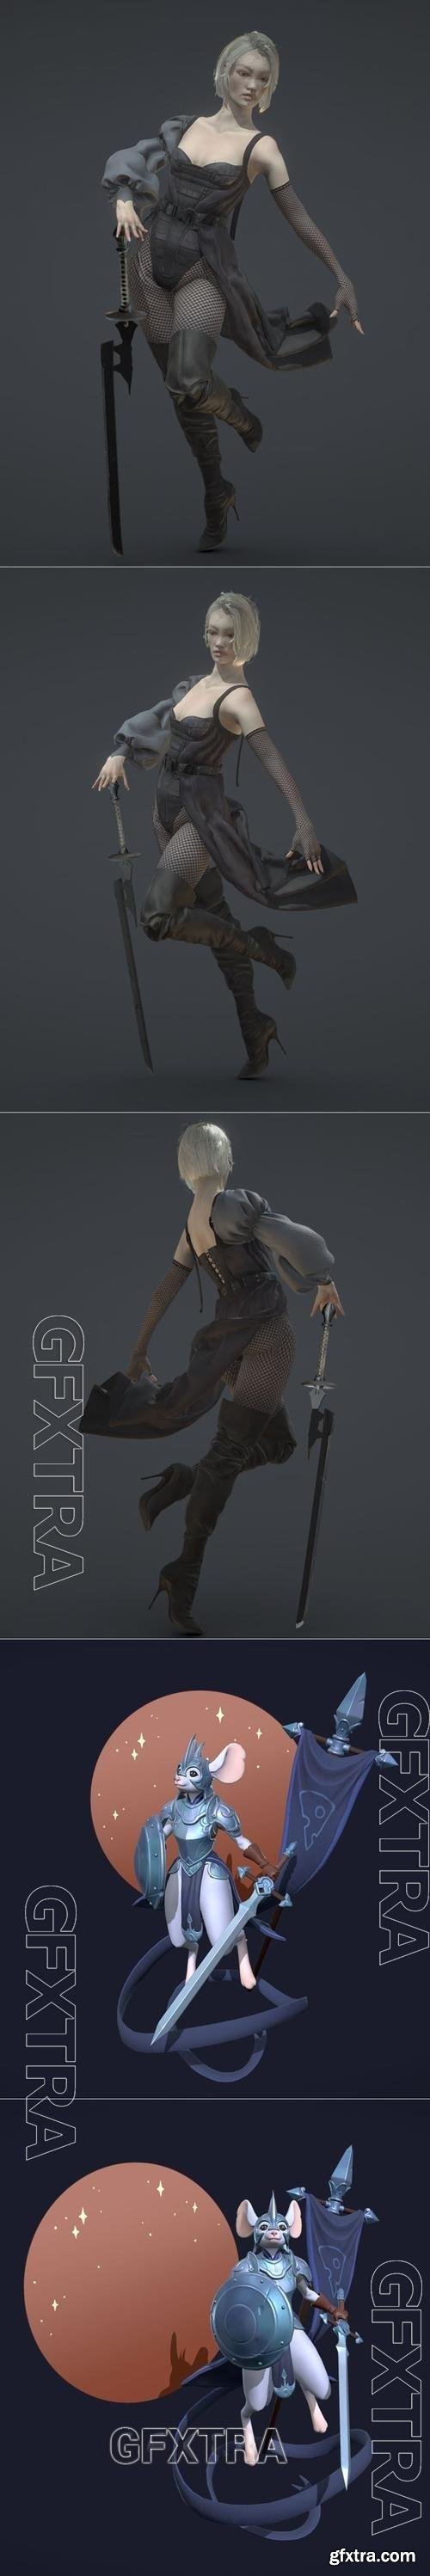 NieR Automata inspired character and Piper 3D